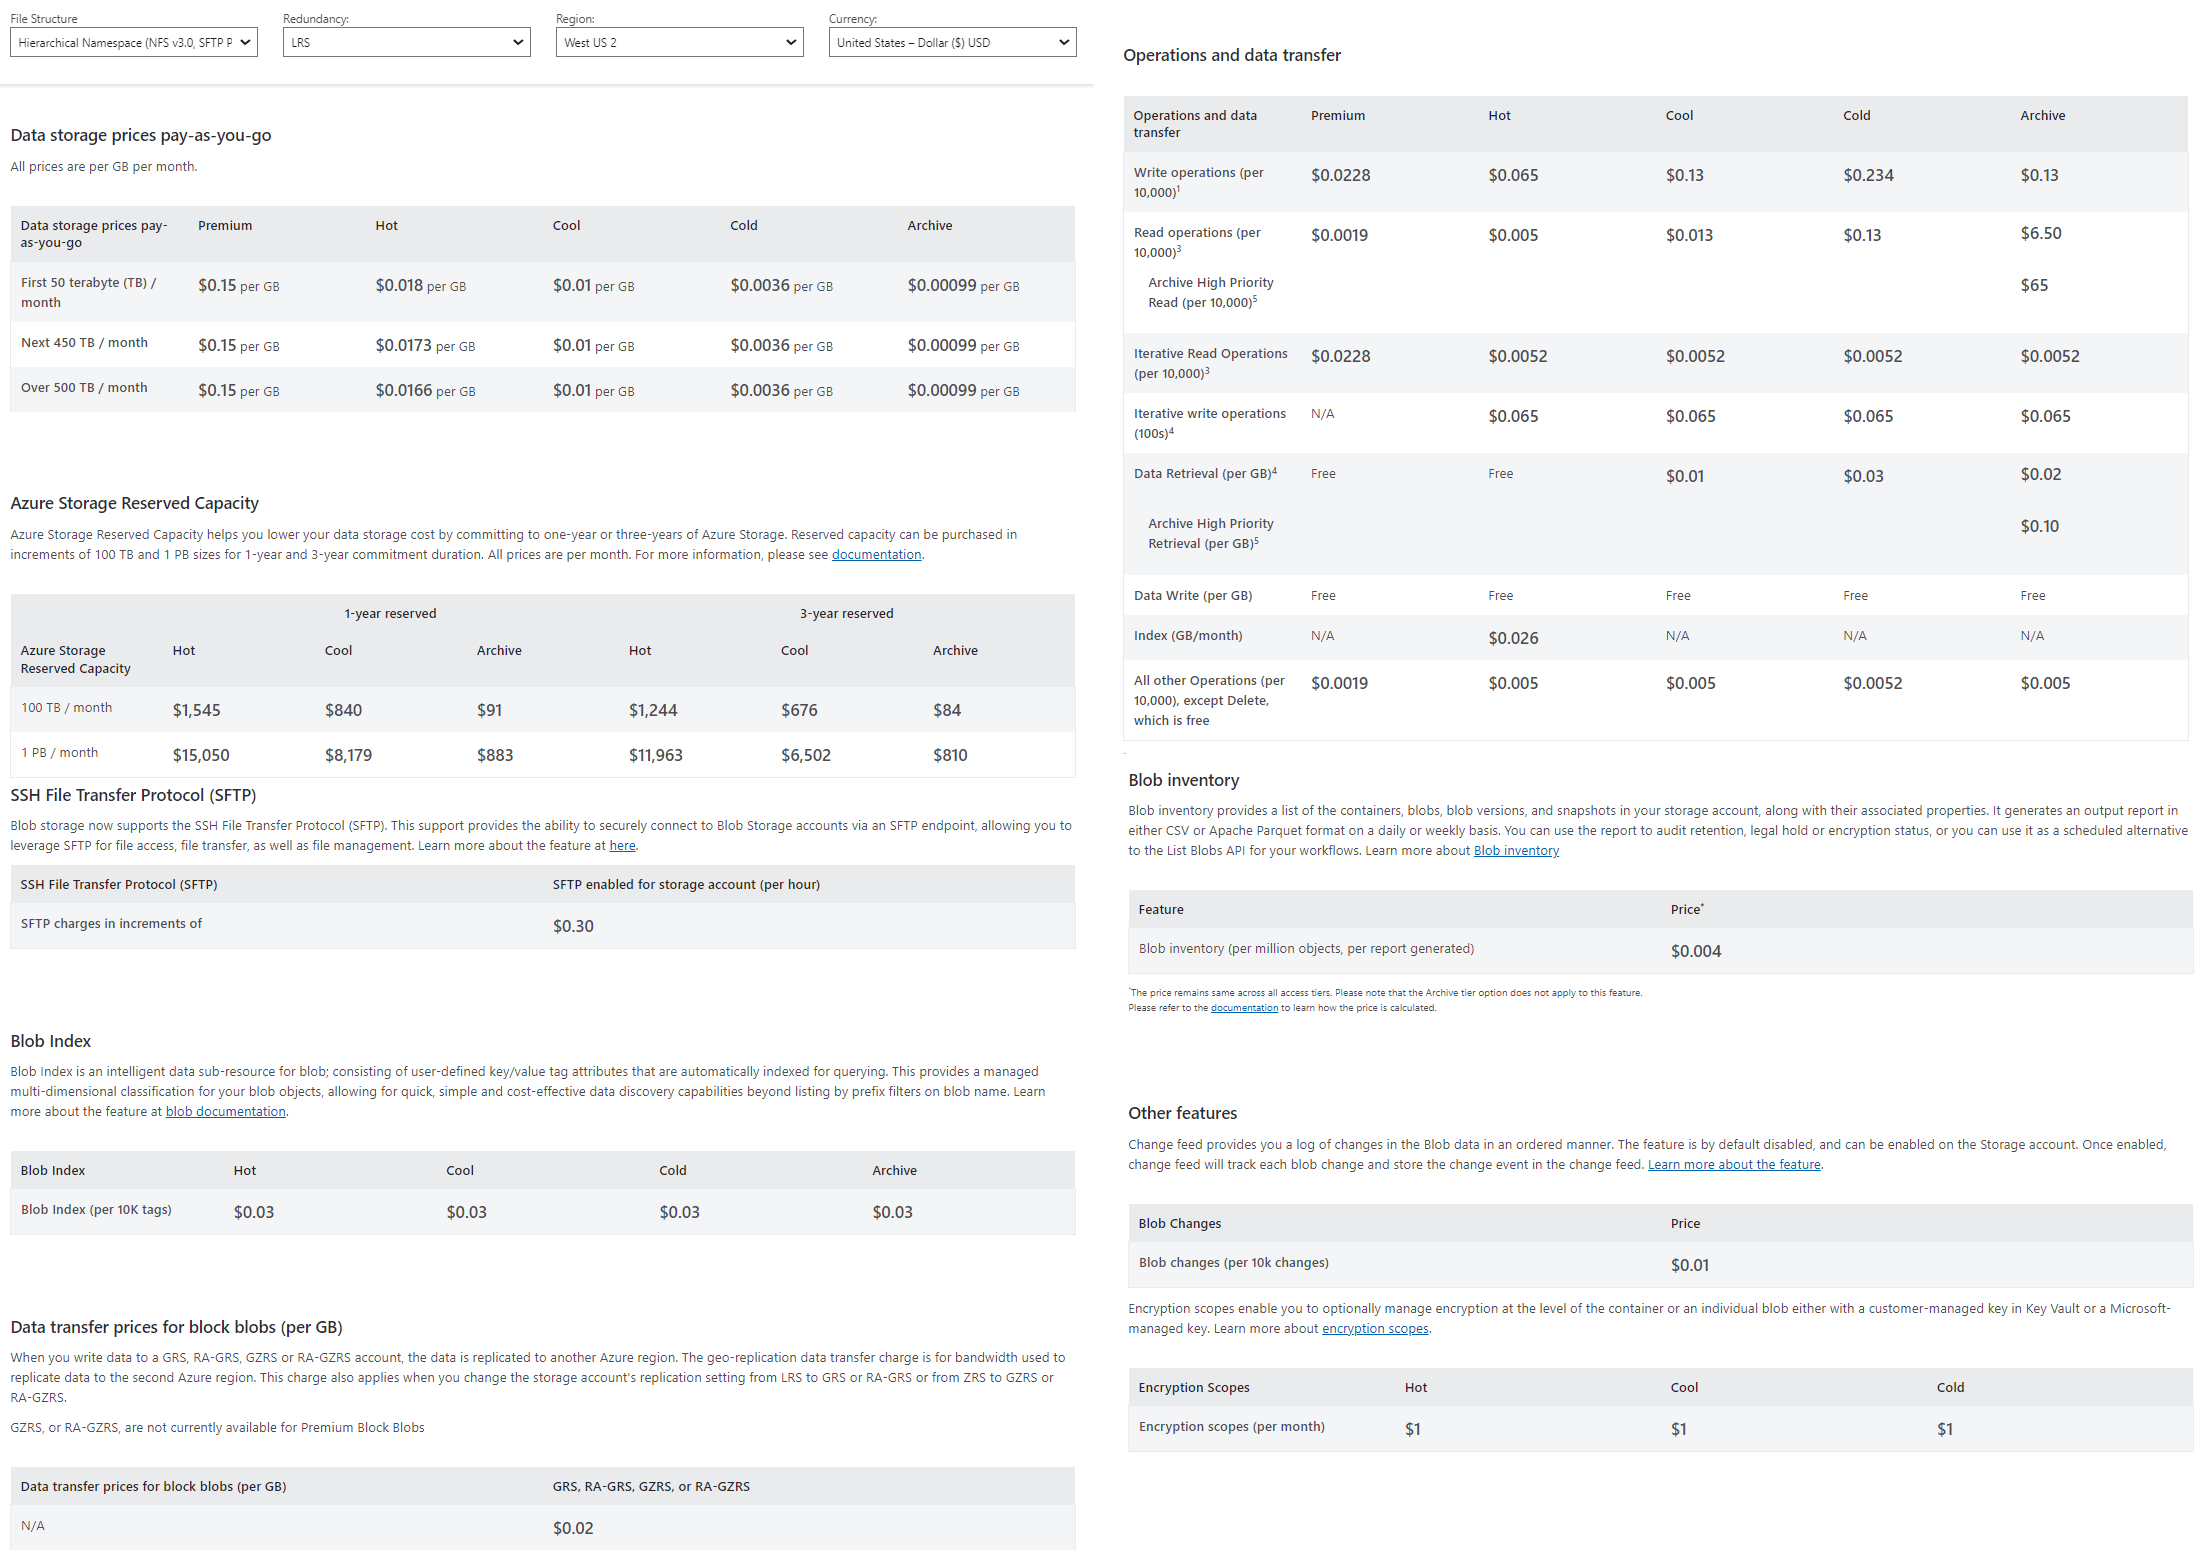 Screenshot from https://azure.microsoft.com/en-gb/pricing/details/storage/blobs/ of all the options available